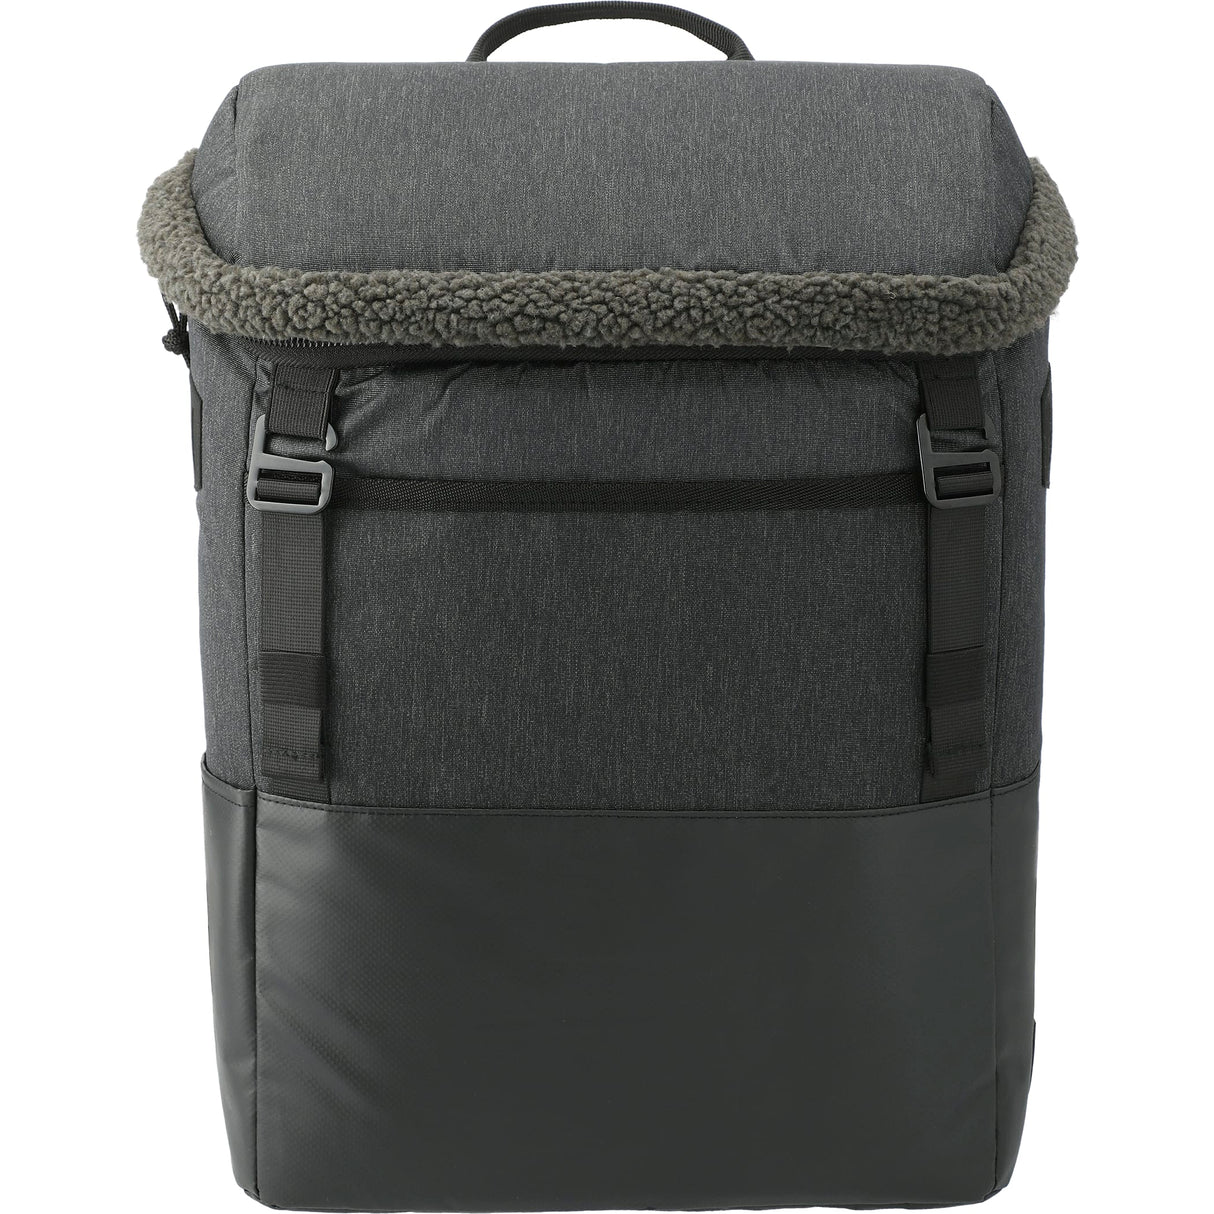 Field & Co.® Fireside Eco 12 Can Backpack Cooler